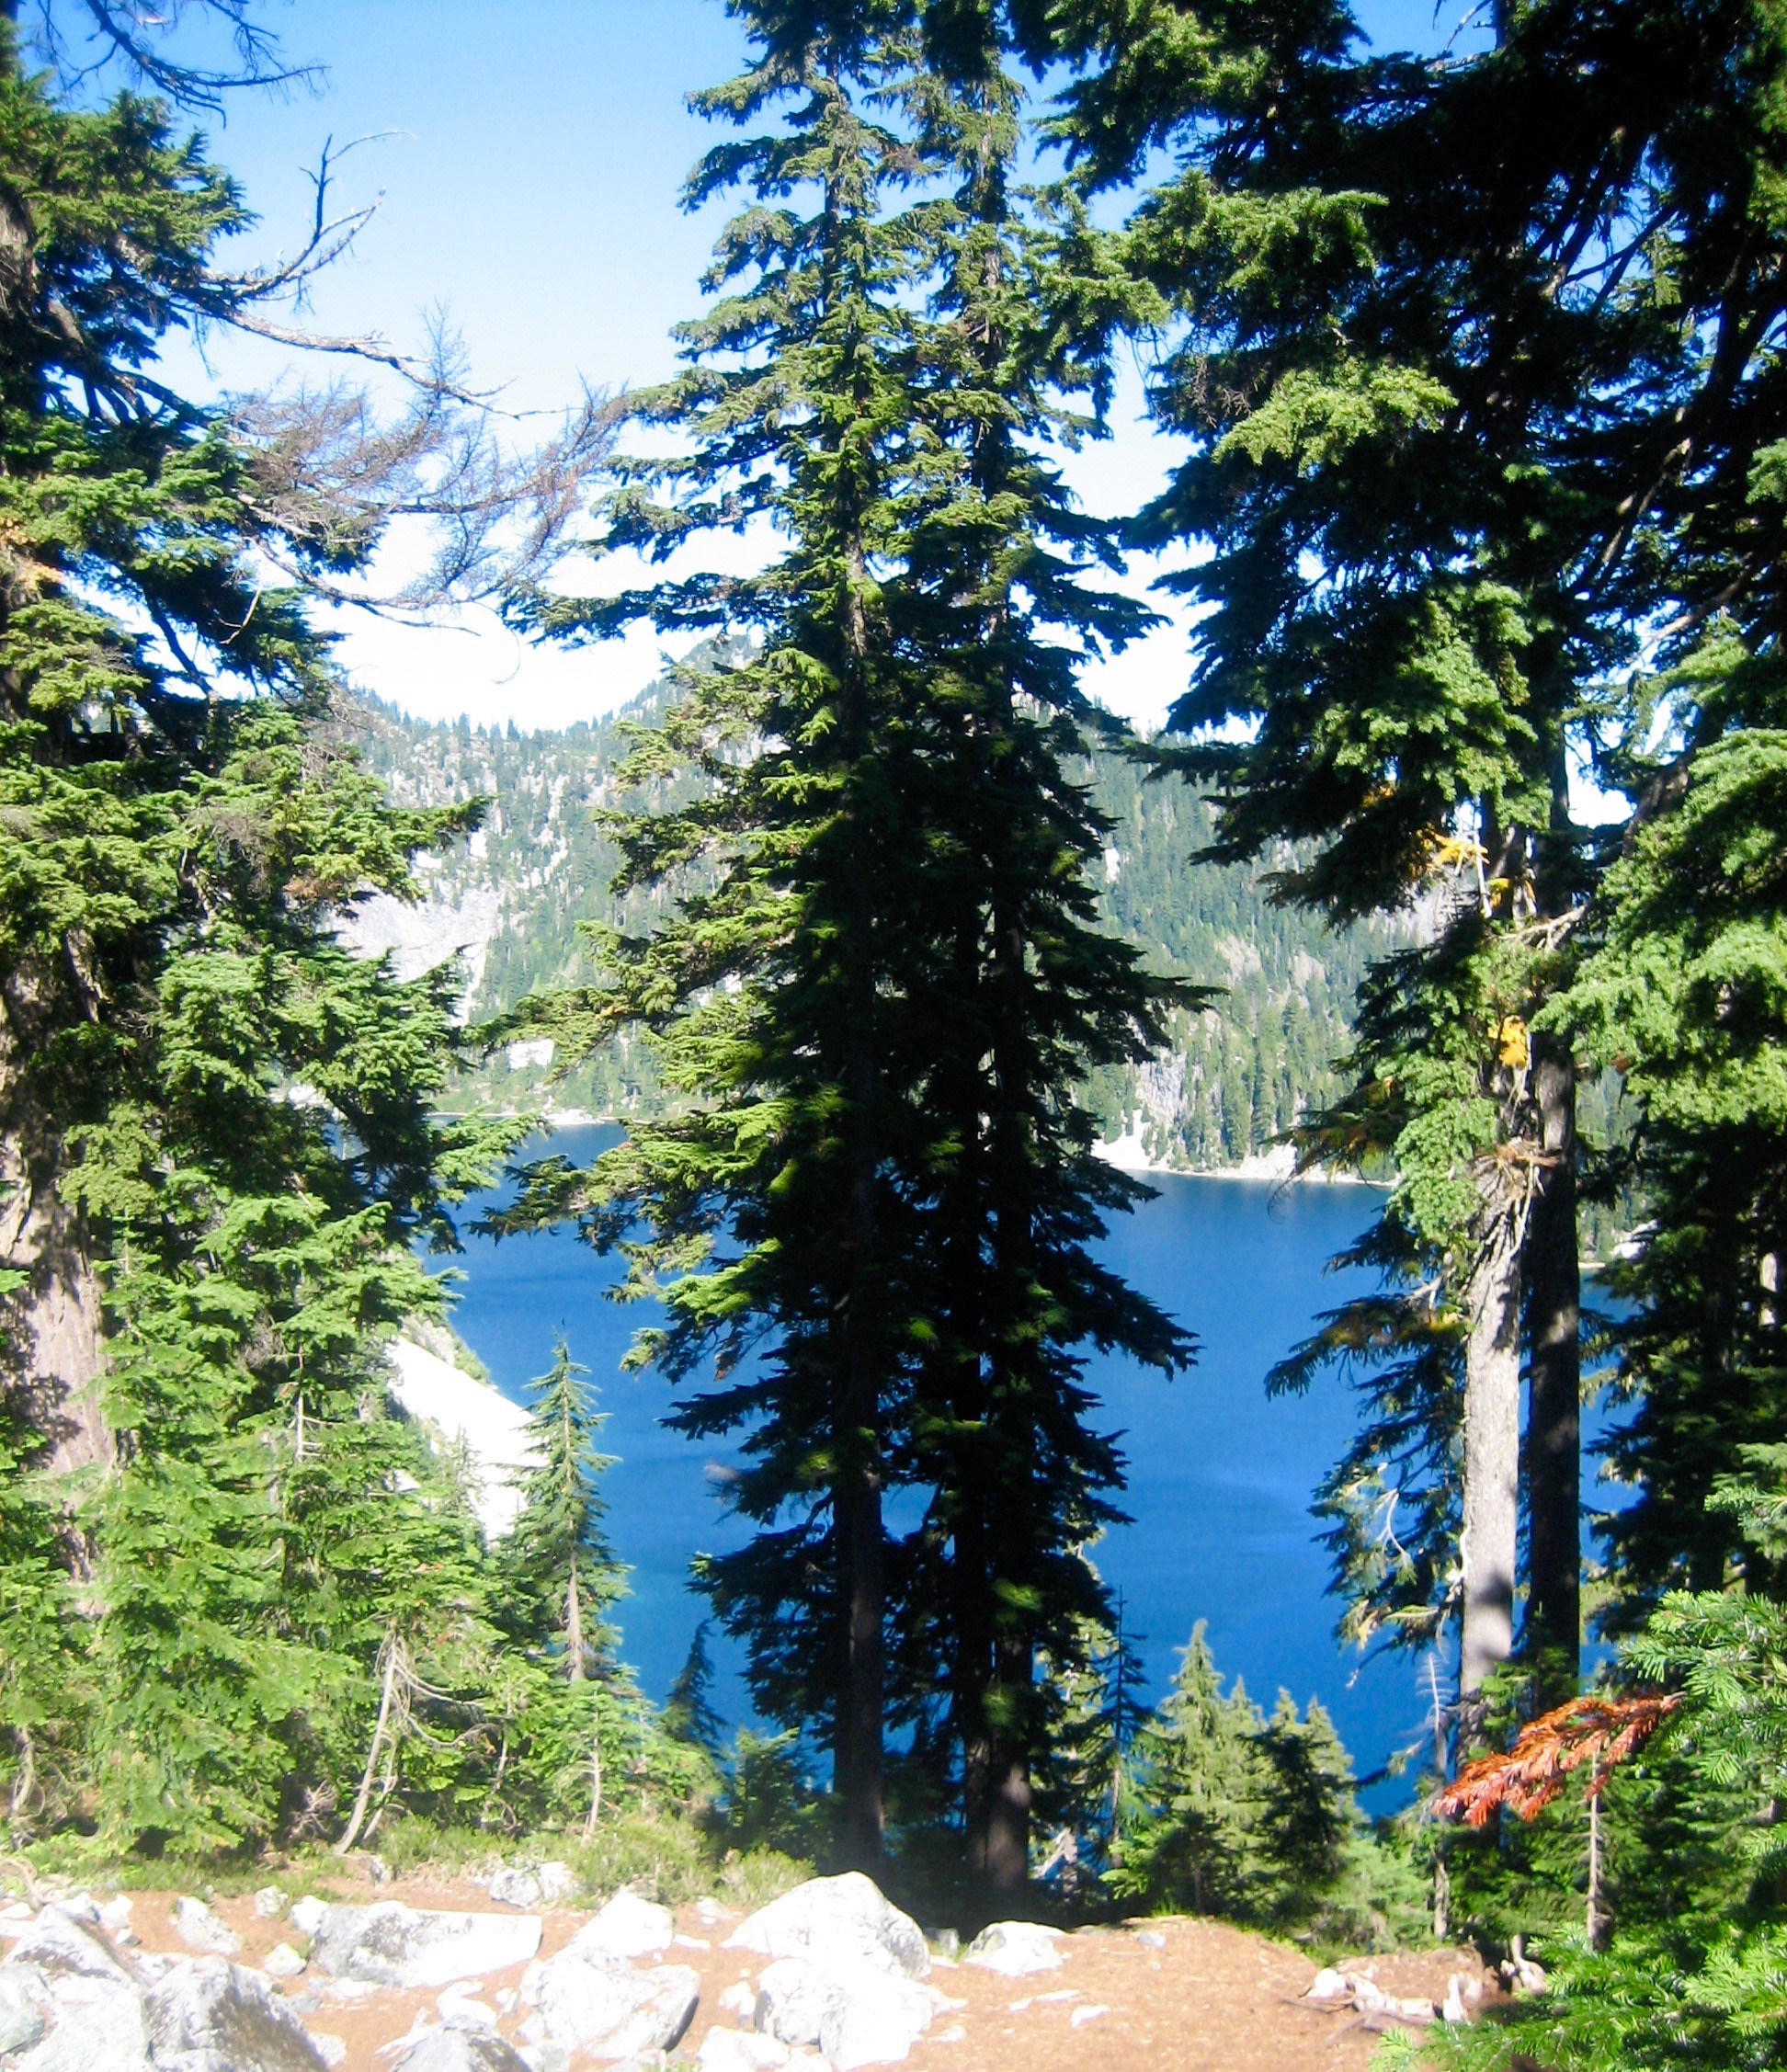 Best Hikes in the Cascades - Snow Lake